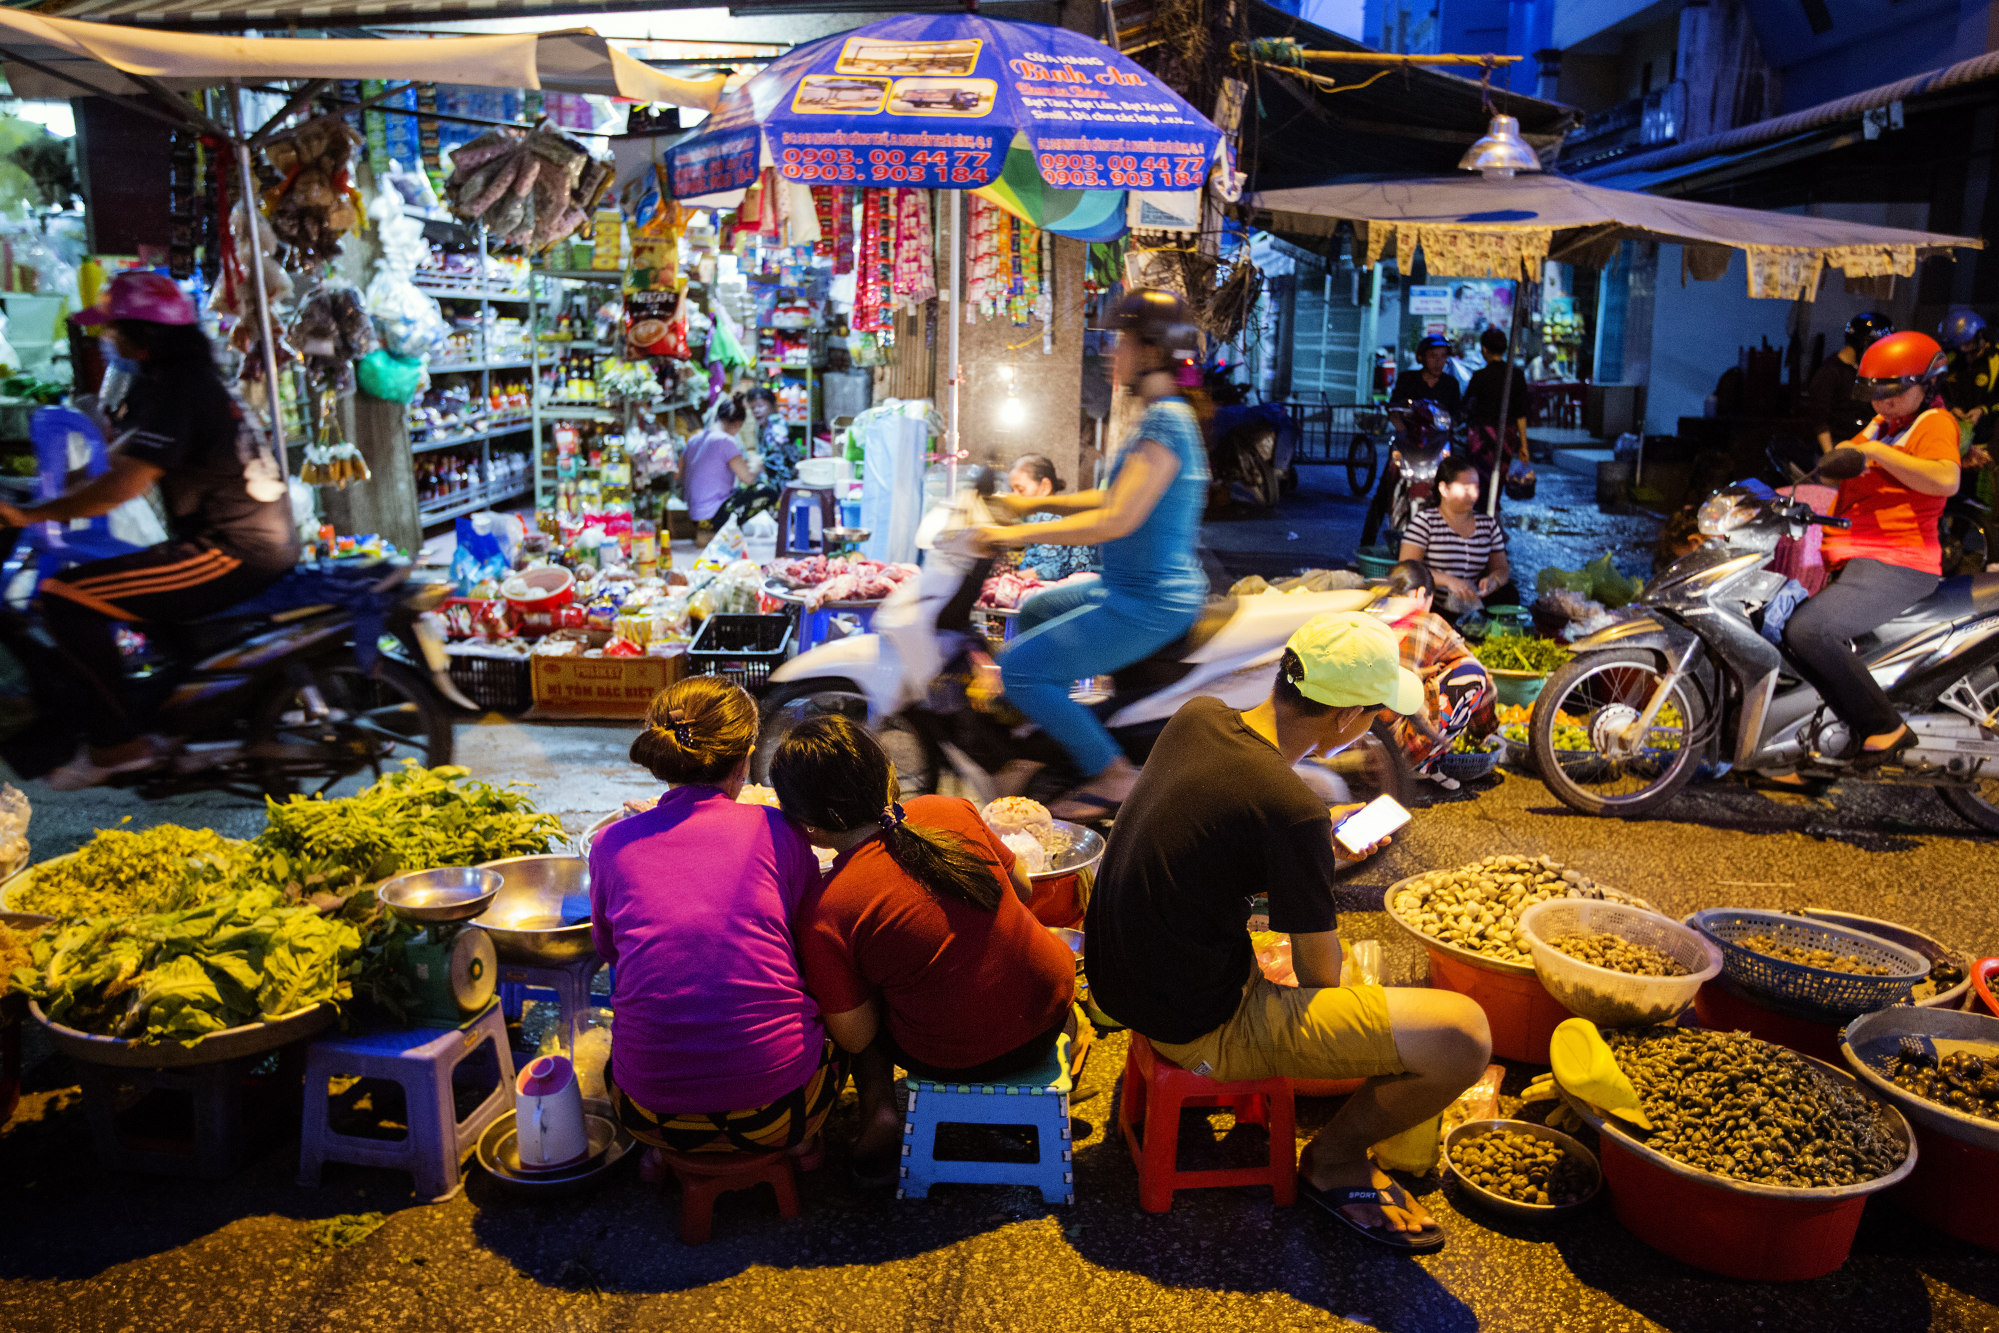 Motorcyclists pass vendors selling food in a market at night in Ho Chi Minh City, Vietnam.